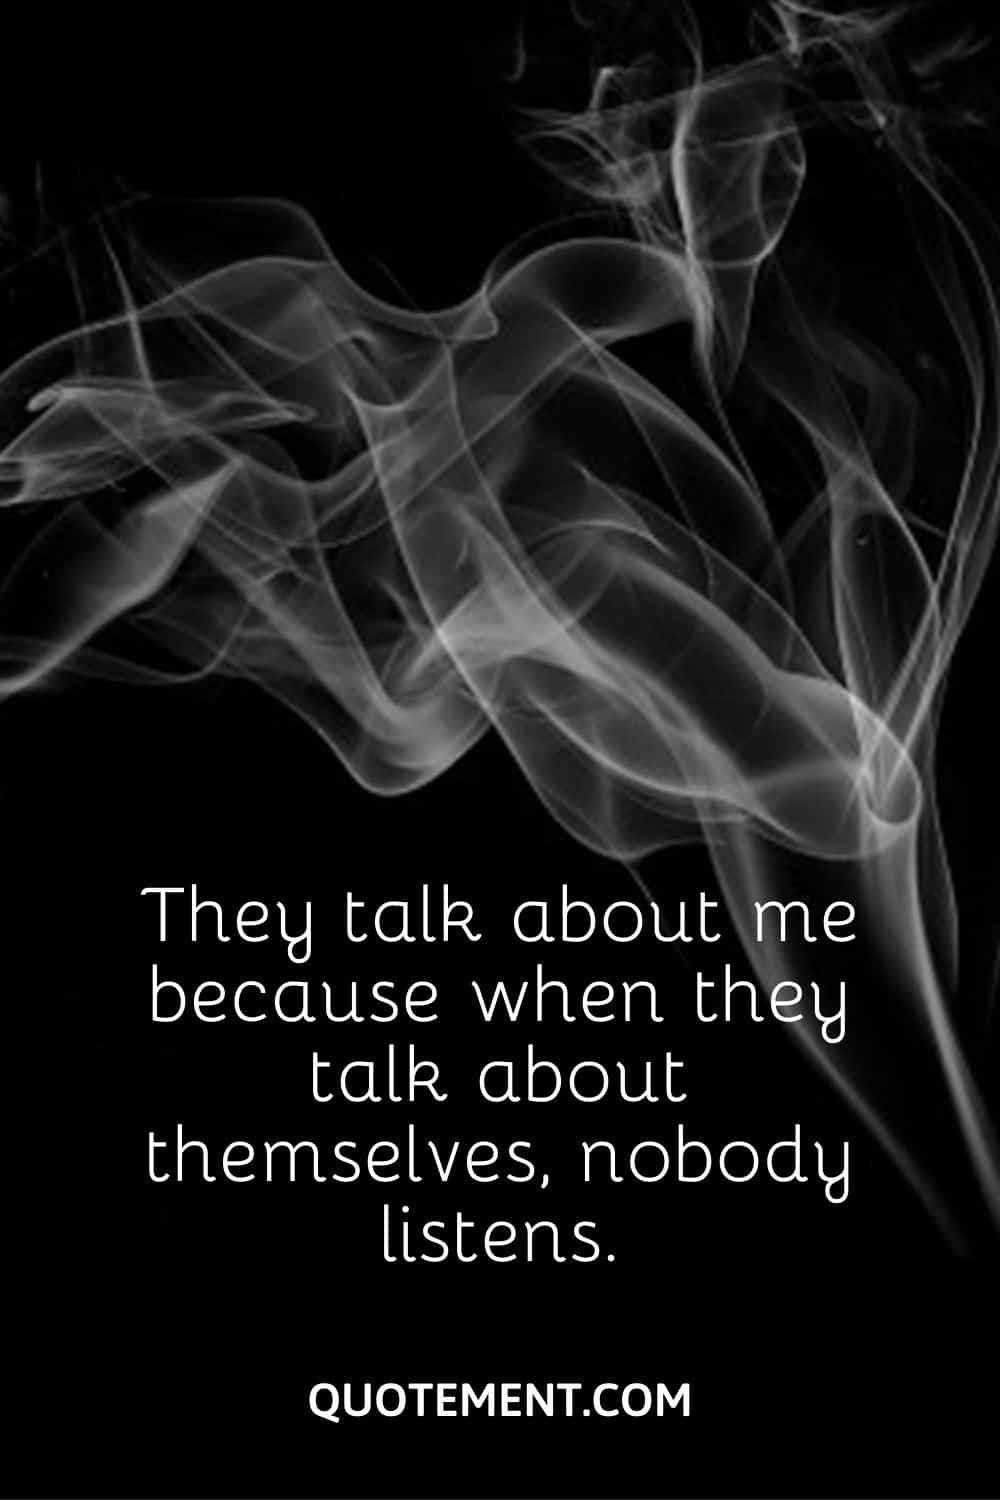 They talk about me because when they talk about themselves, nobody listens